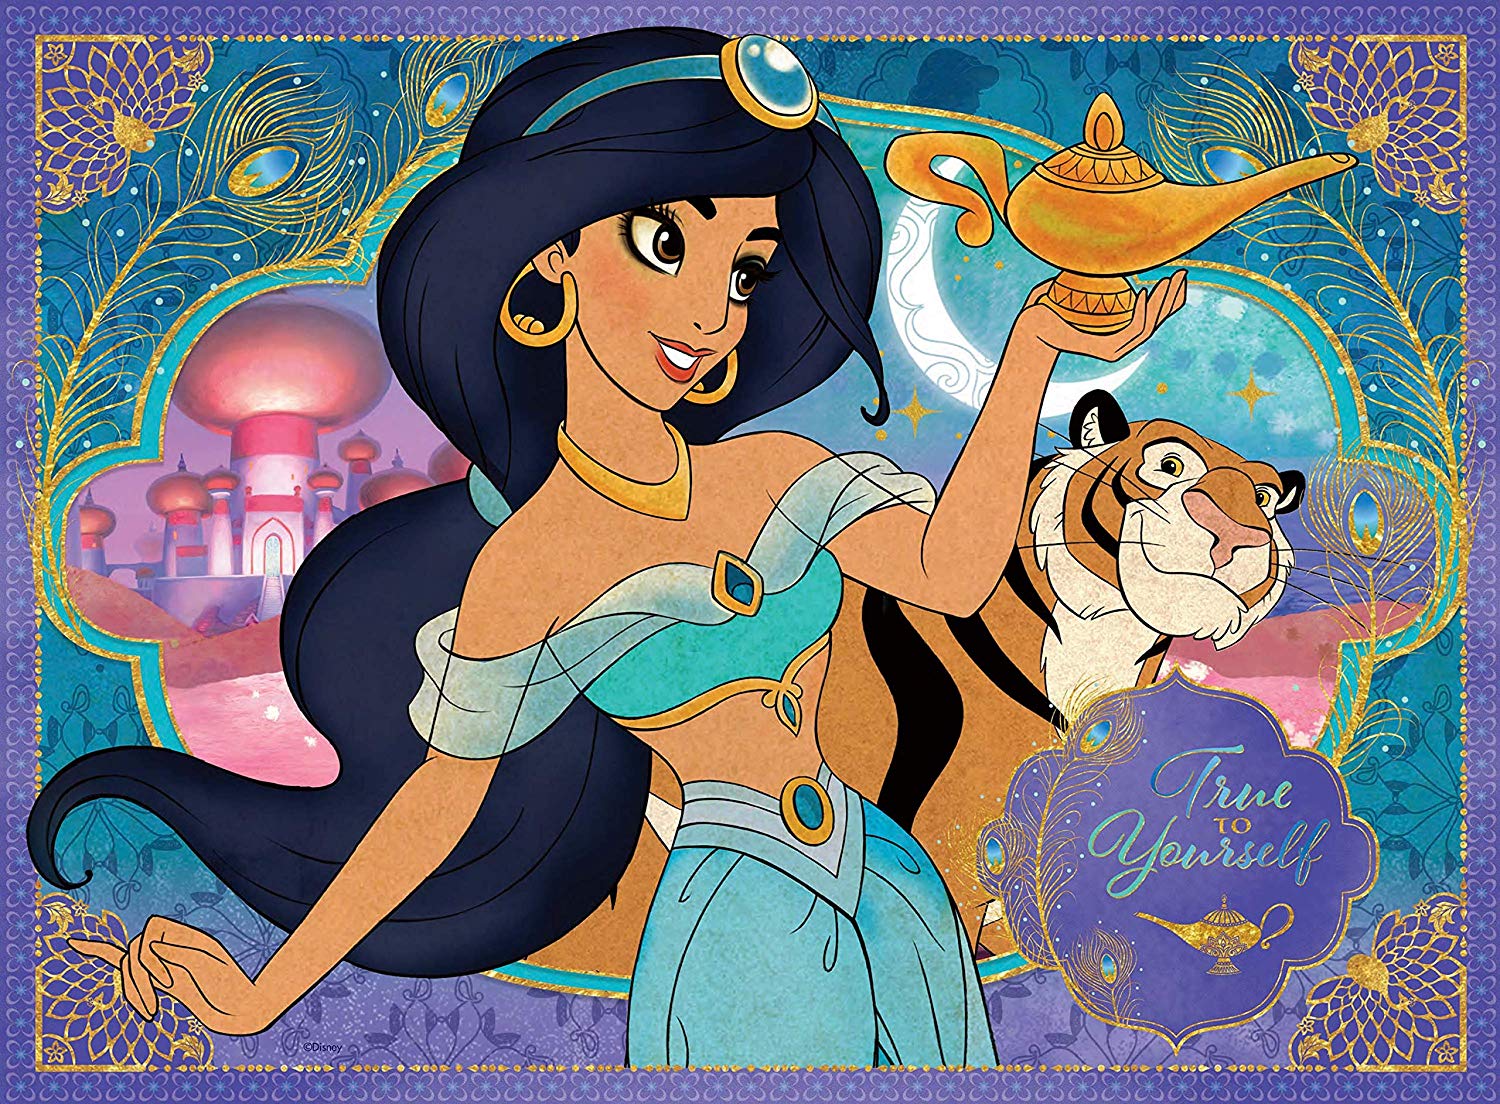 betty colbourne recommends princess jasmine pictures pic